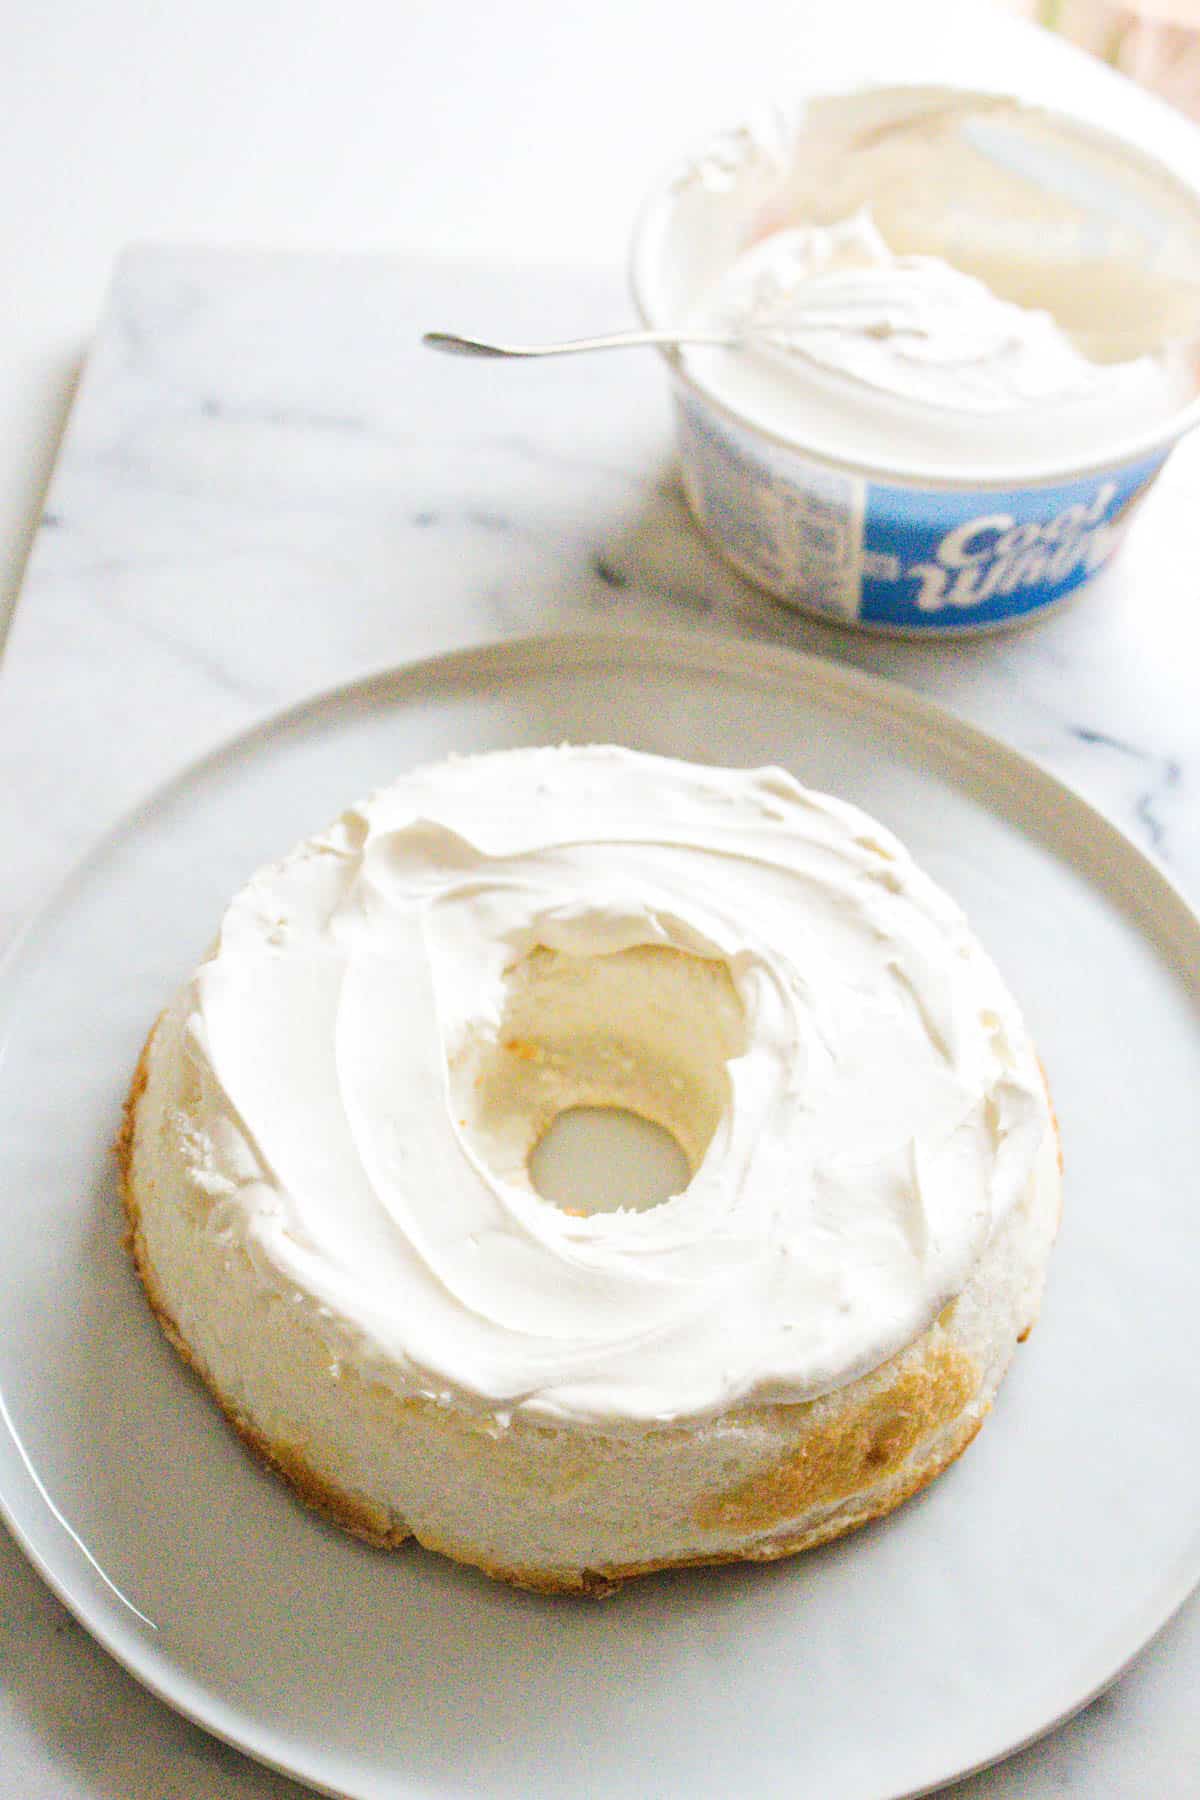 Sliced angel food cake with Cool Whip spread on and the container next to it.